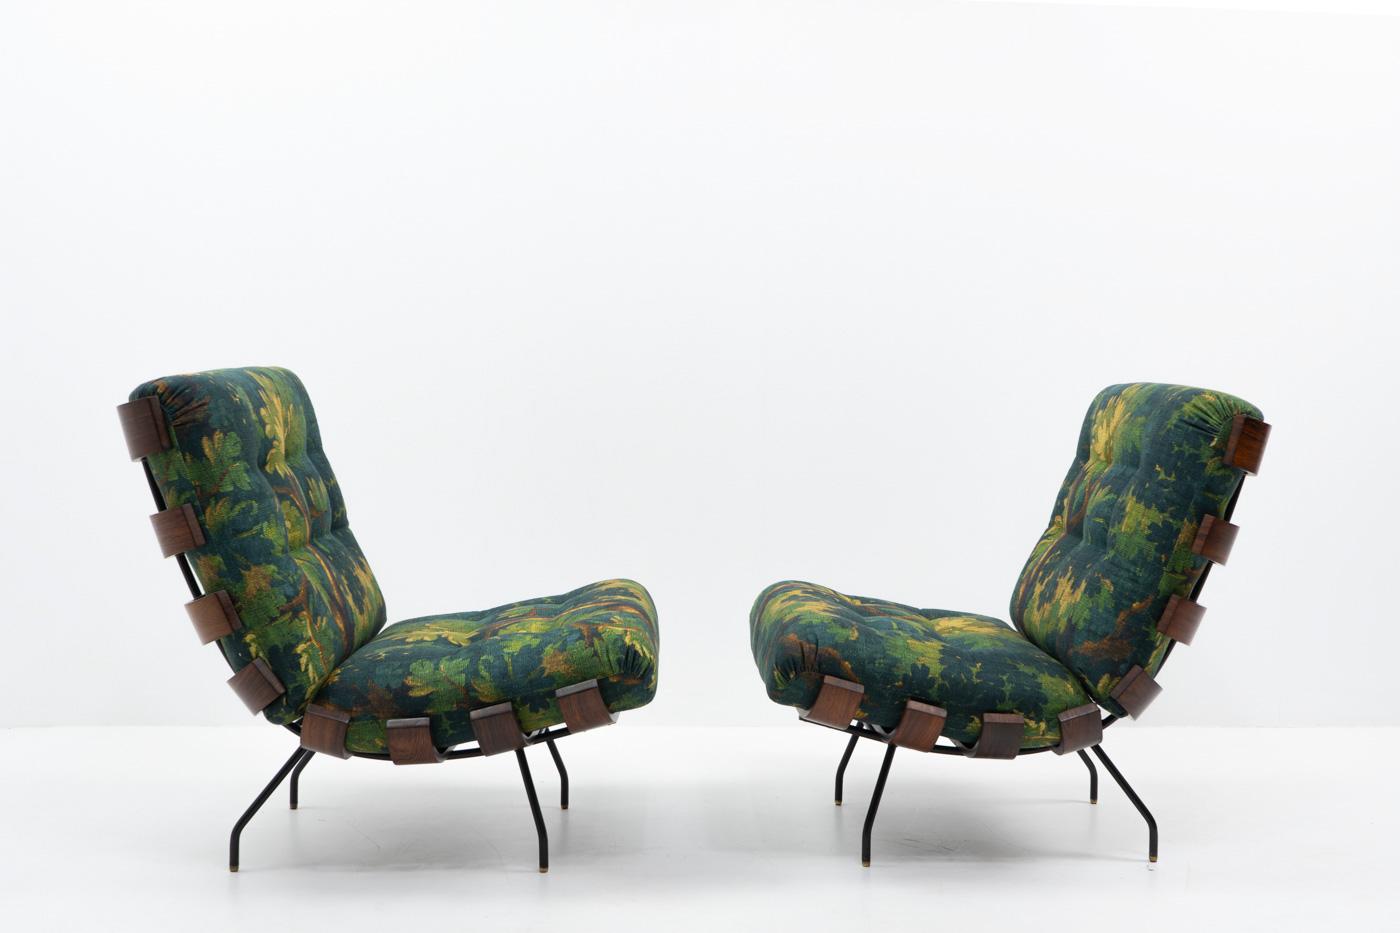 Brazilian Design Costela Lounge Chairs by Hauner & Eisler for Forma, 1950s For Sale 1